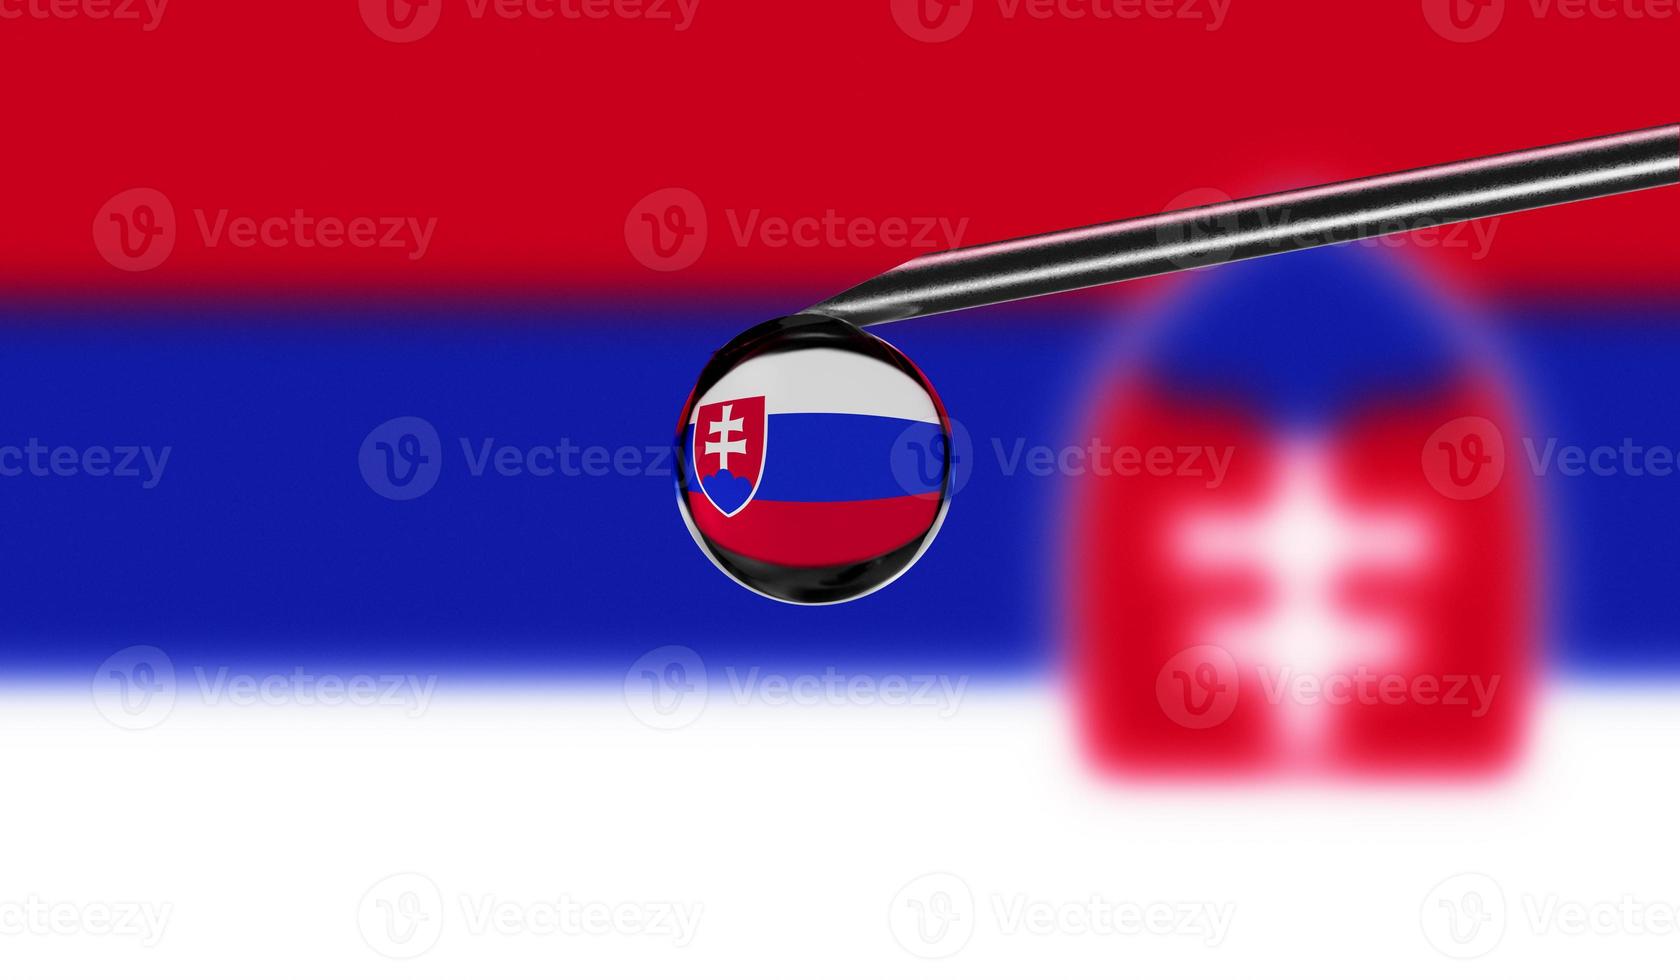 Vaccine syringe with drop on needle against national flag of Slovakia background. Medical concept vaccination. Coronavirus Sars-Cov-2 pandemic protection. National safety idea. photo